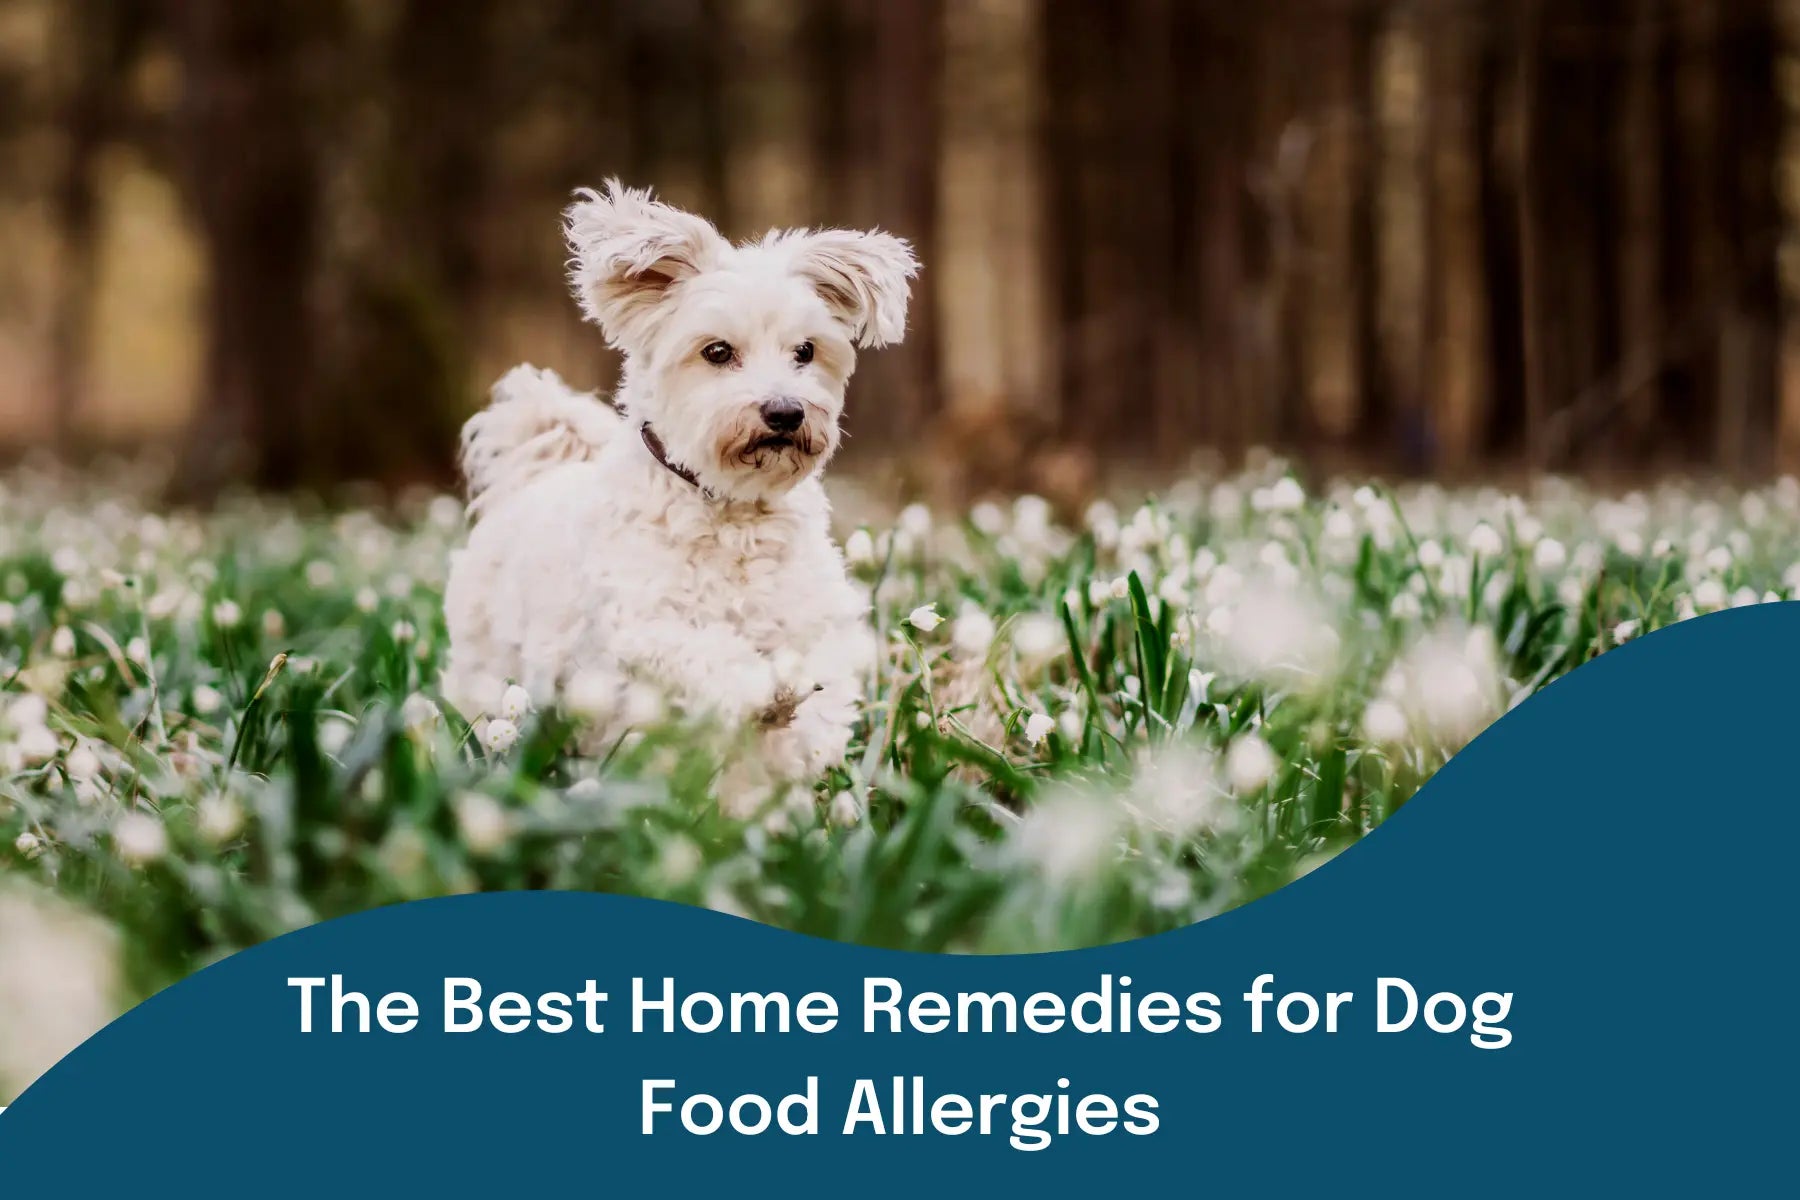 The Best Home Remedies for Dog Food Allergies